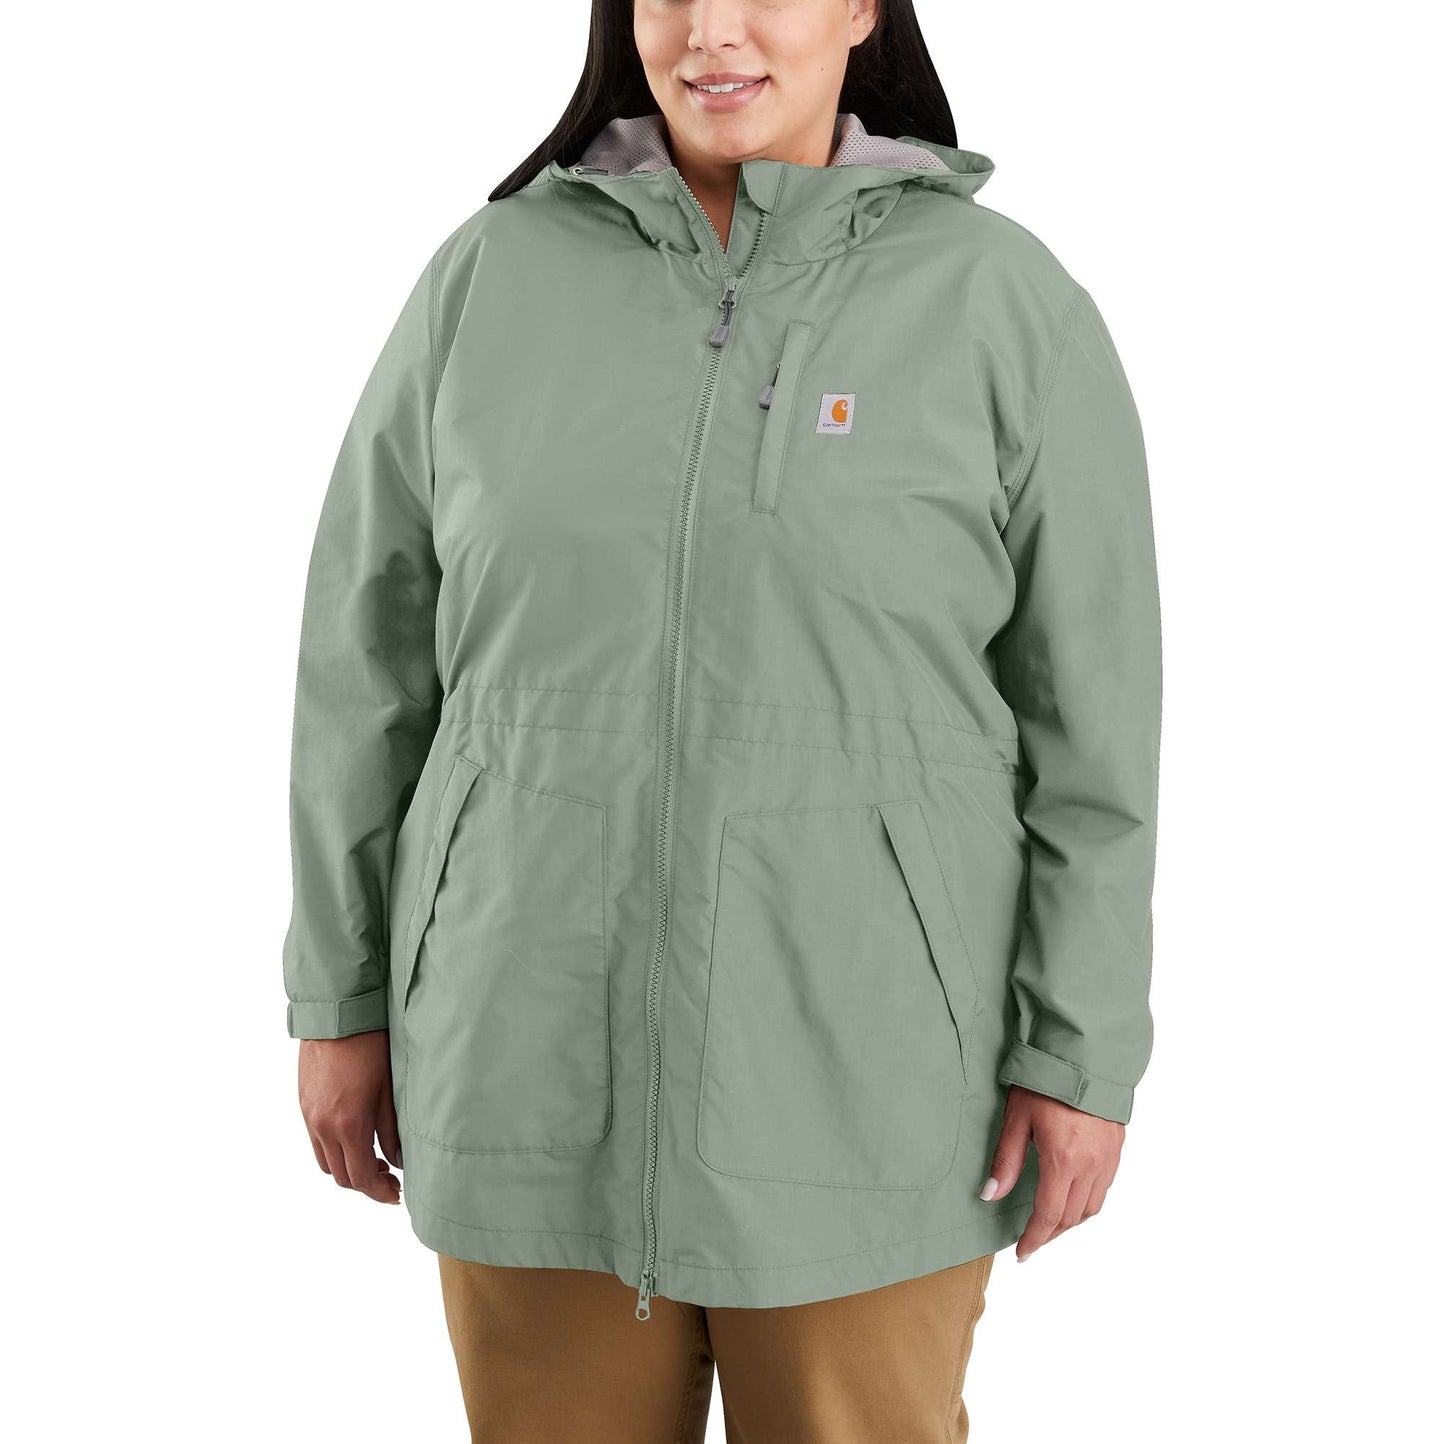 Women's Storm Defender® Relaxed Fit Lightweight Jacket - 1 Warm Rating |  Carhartt Reworked